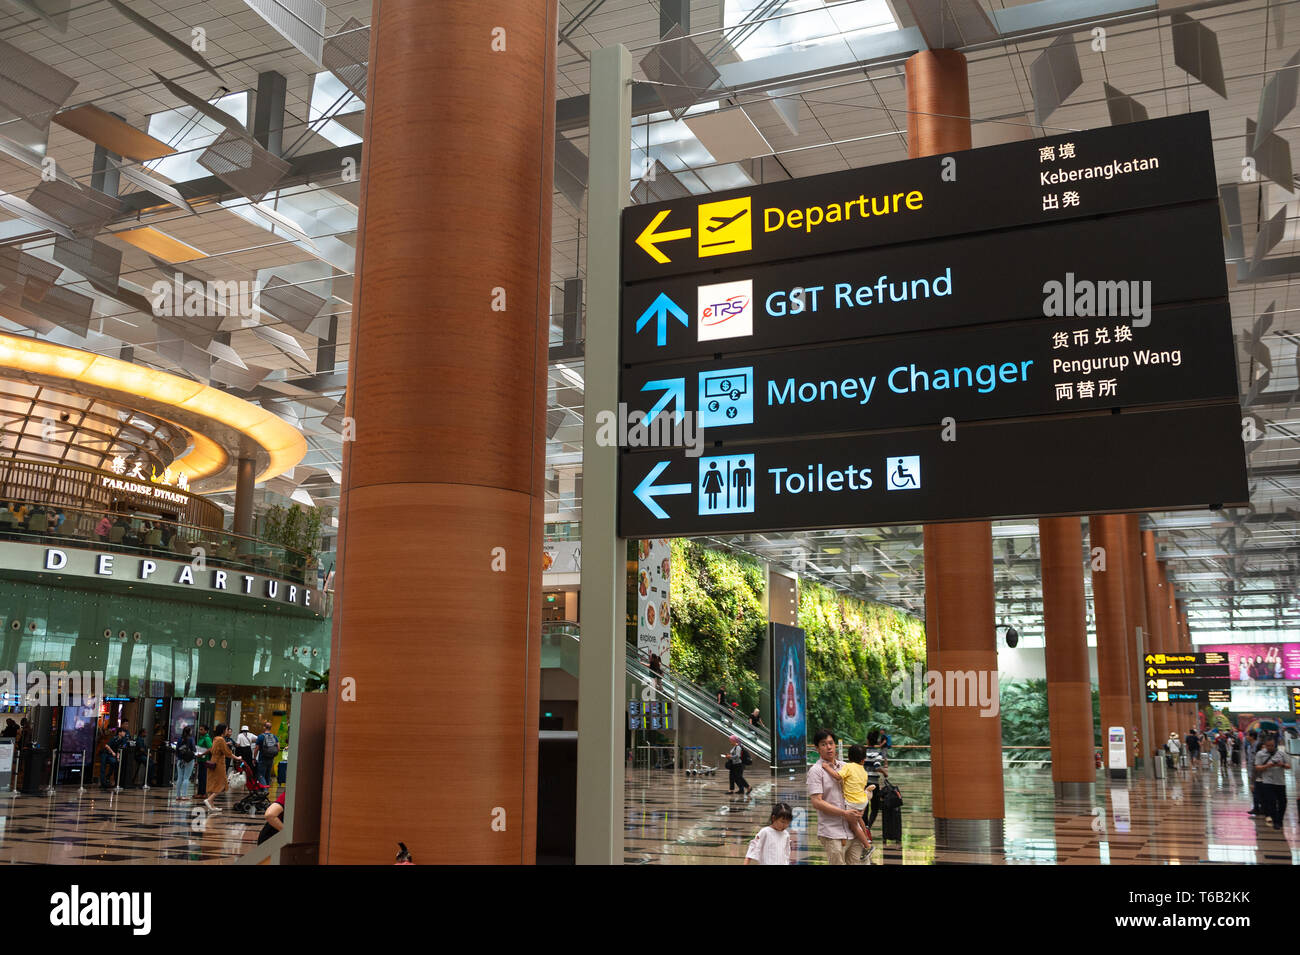 28.04.2019, Singapore, Republic of Singapore, Asia - Signposts at the departure level of Terminal 3 at Changi Airport. Stock Photo